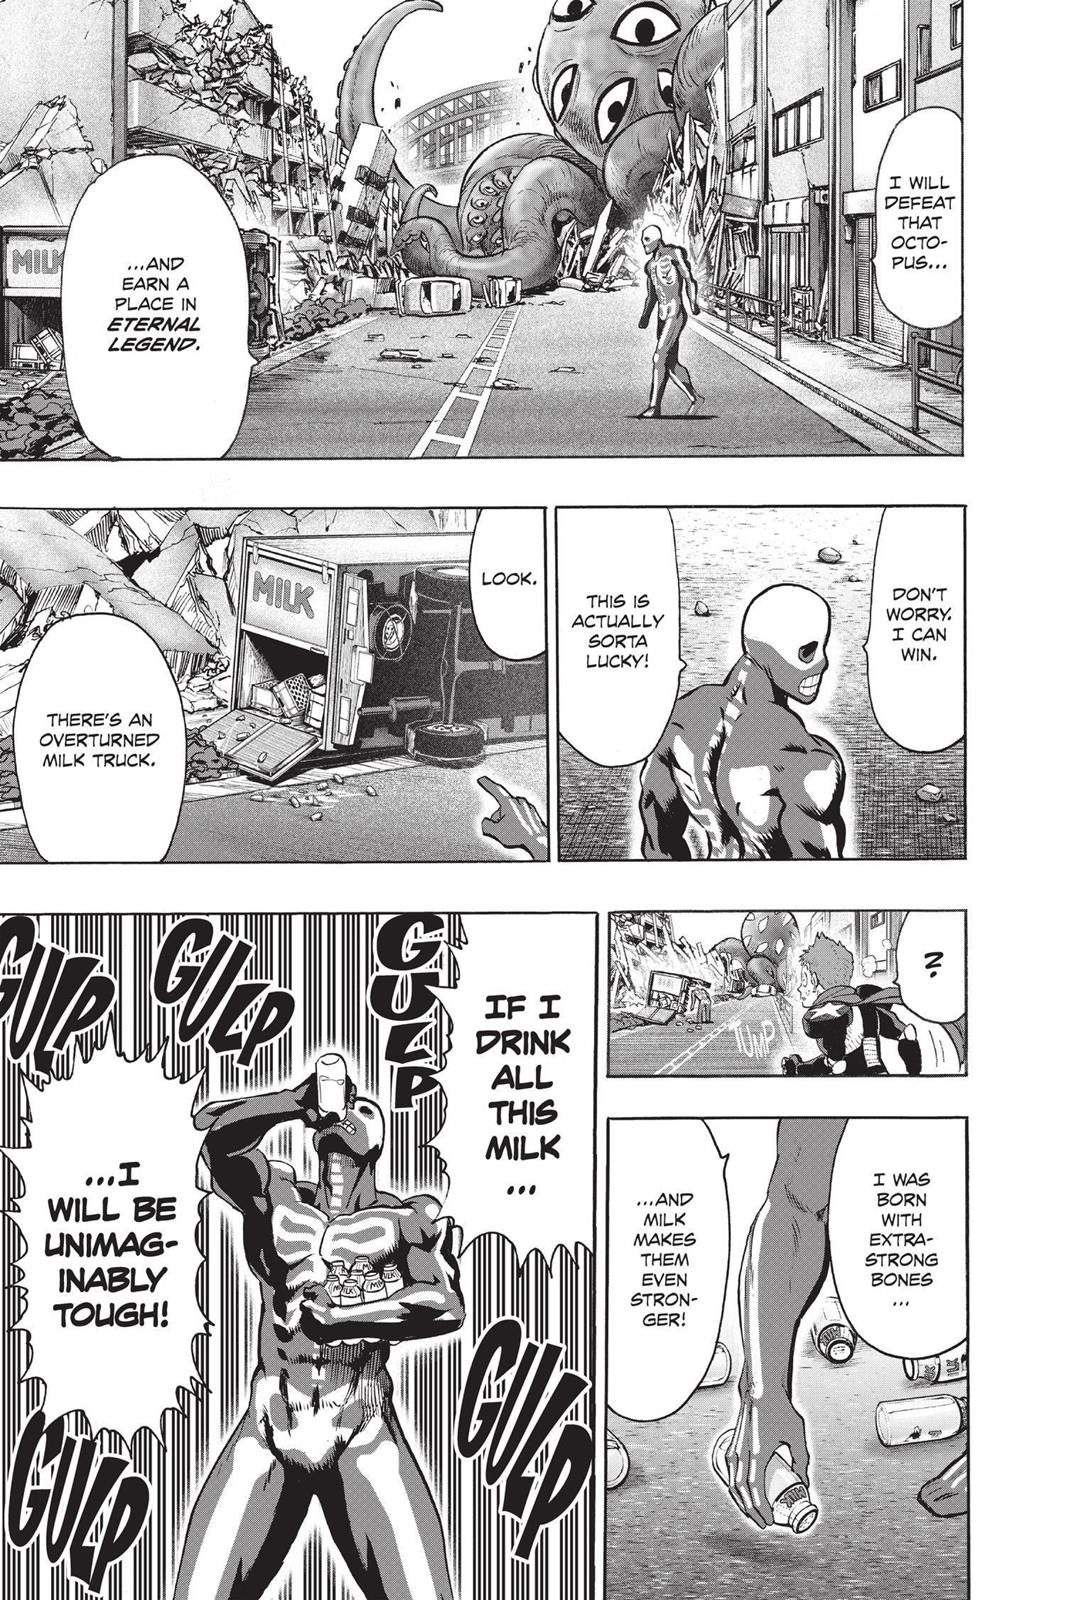 One-Punch Man, Punch 68 image 14